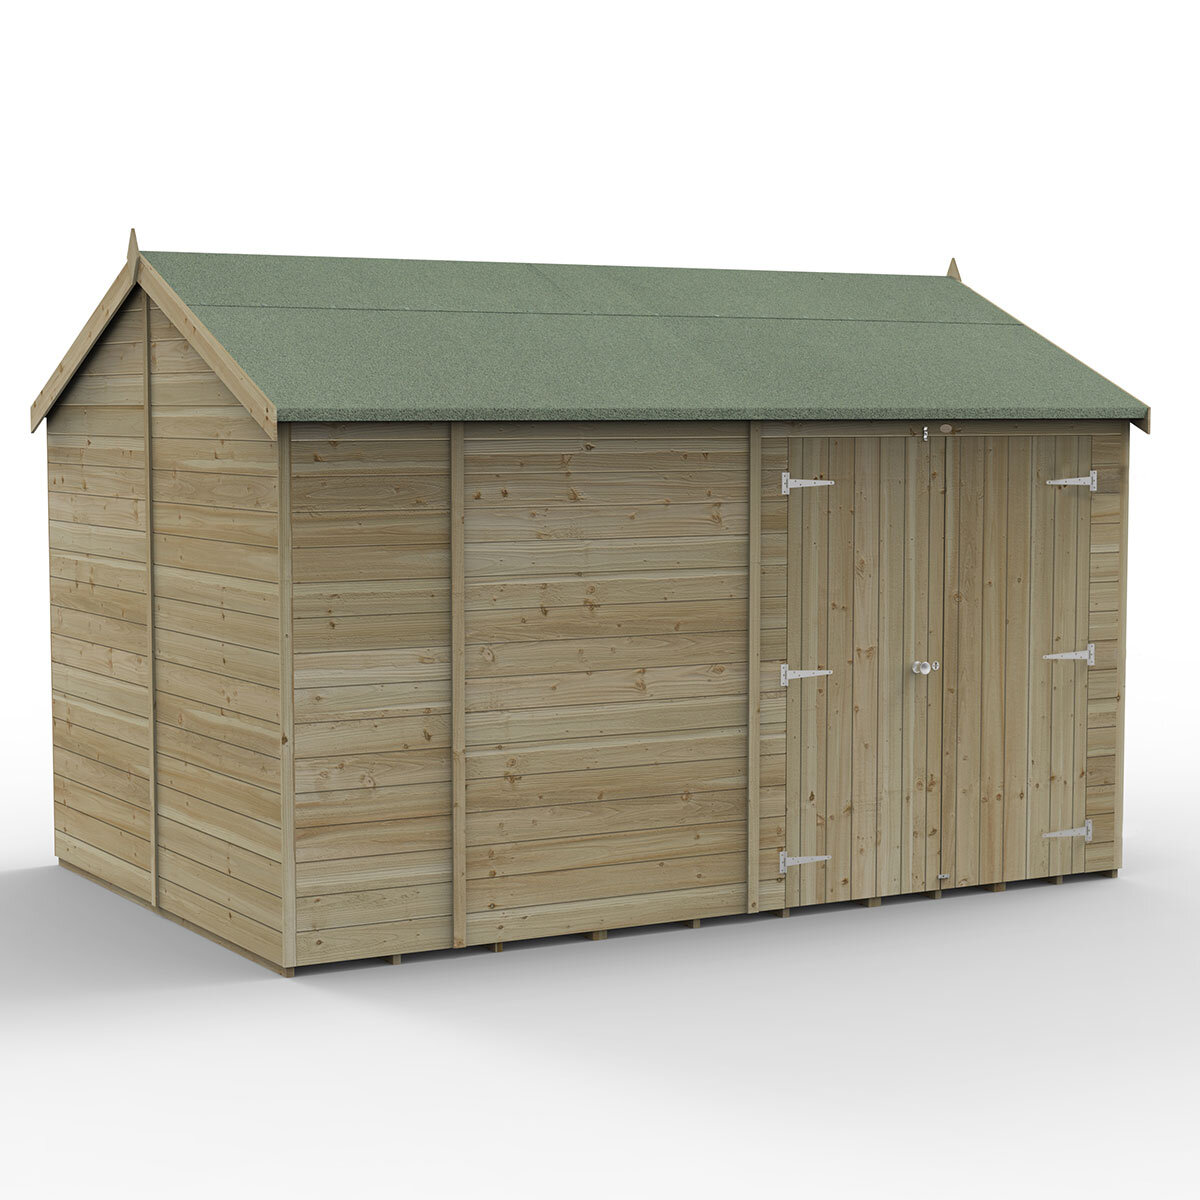 Forest Garden Timberdale 12ft x 8ft 3" (3.6 x 2.5m) Tongue & Groove Wooden Storage Shed